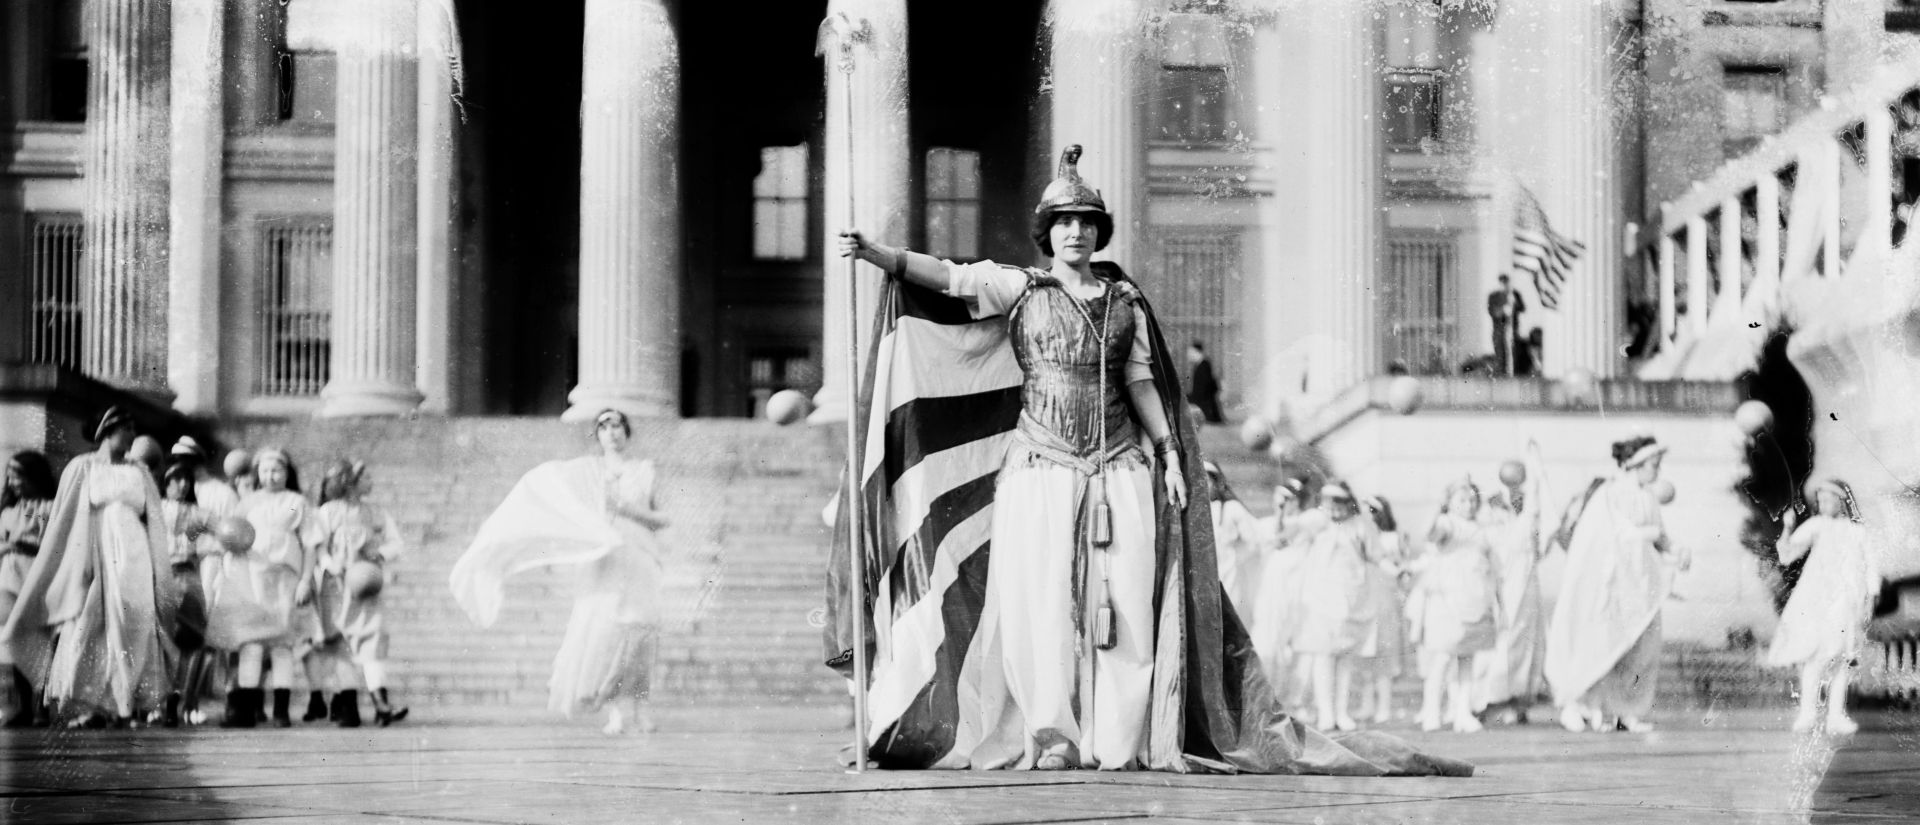 At the end of the procession, German actress Hedwig Reicher posed as Columbia on the steps of the Treasury Building. Library of Congress